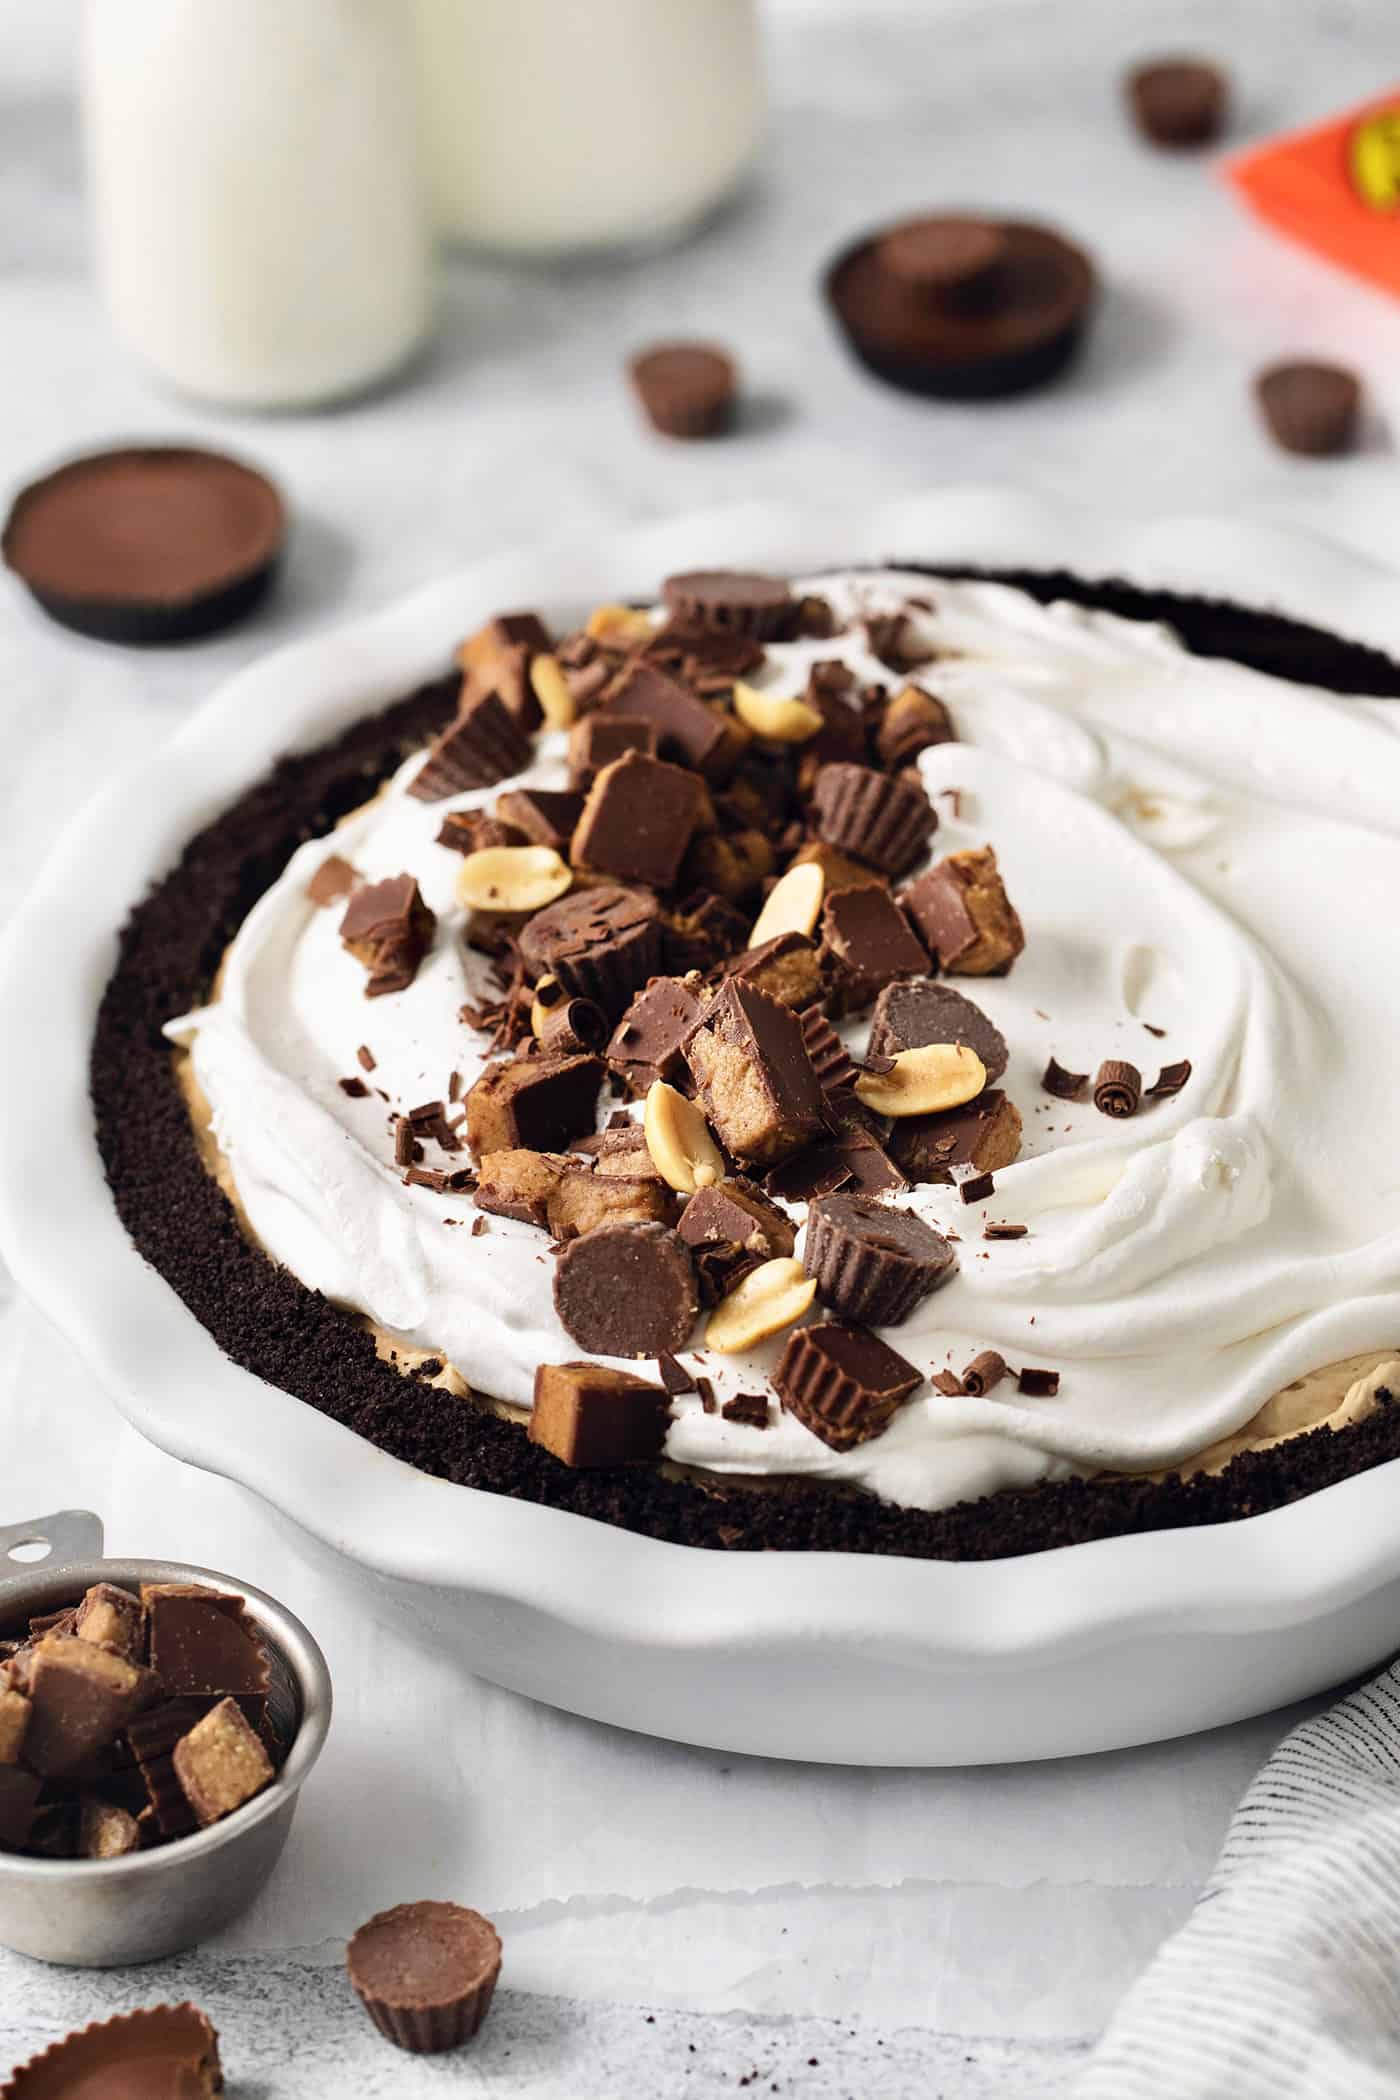 A Reeses pie topped with whipped topping and chopped peanut butter cups.